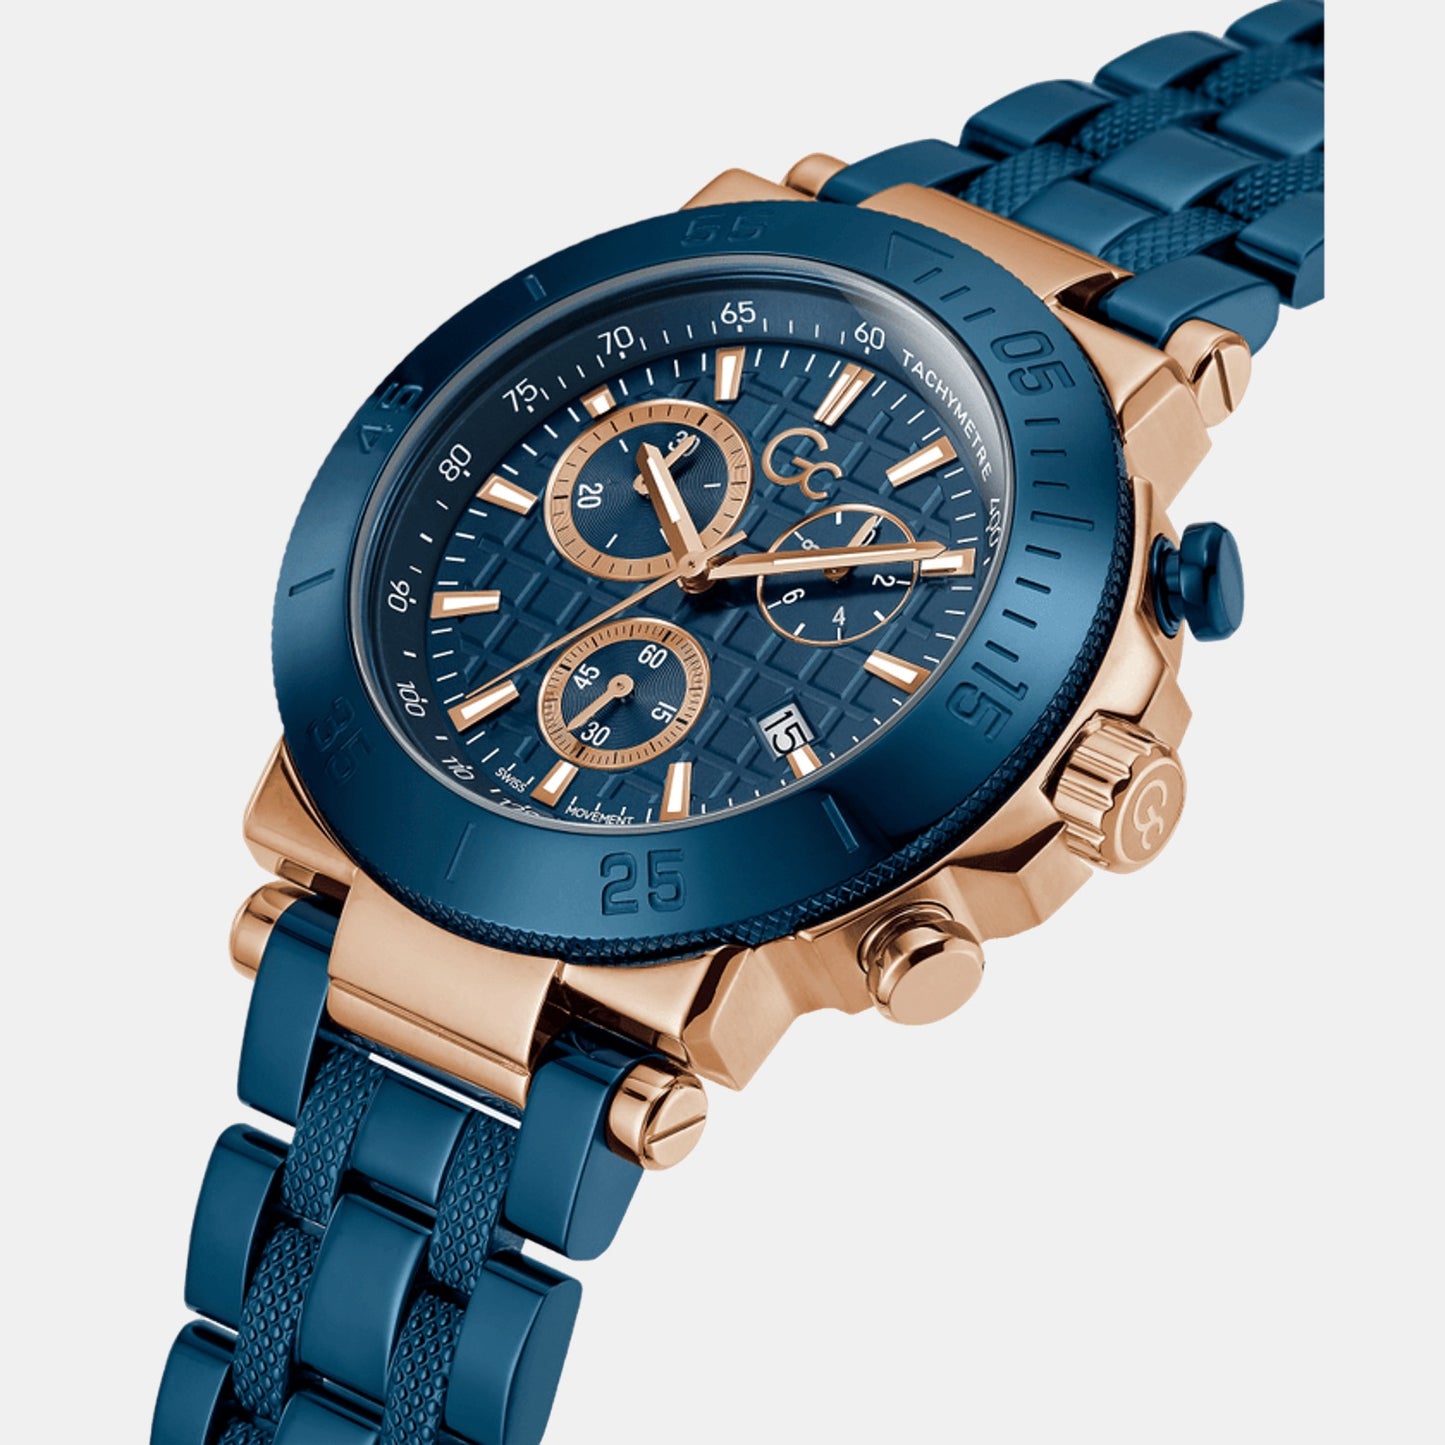 Male Blue Stainless Steel Chronograph Watch Y70001G7MF